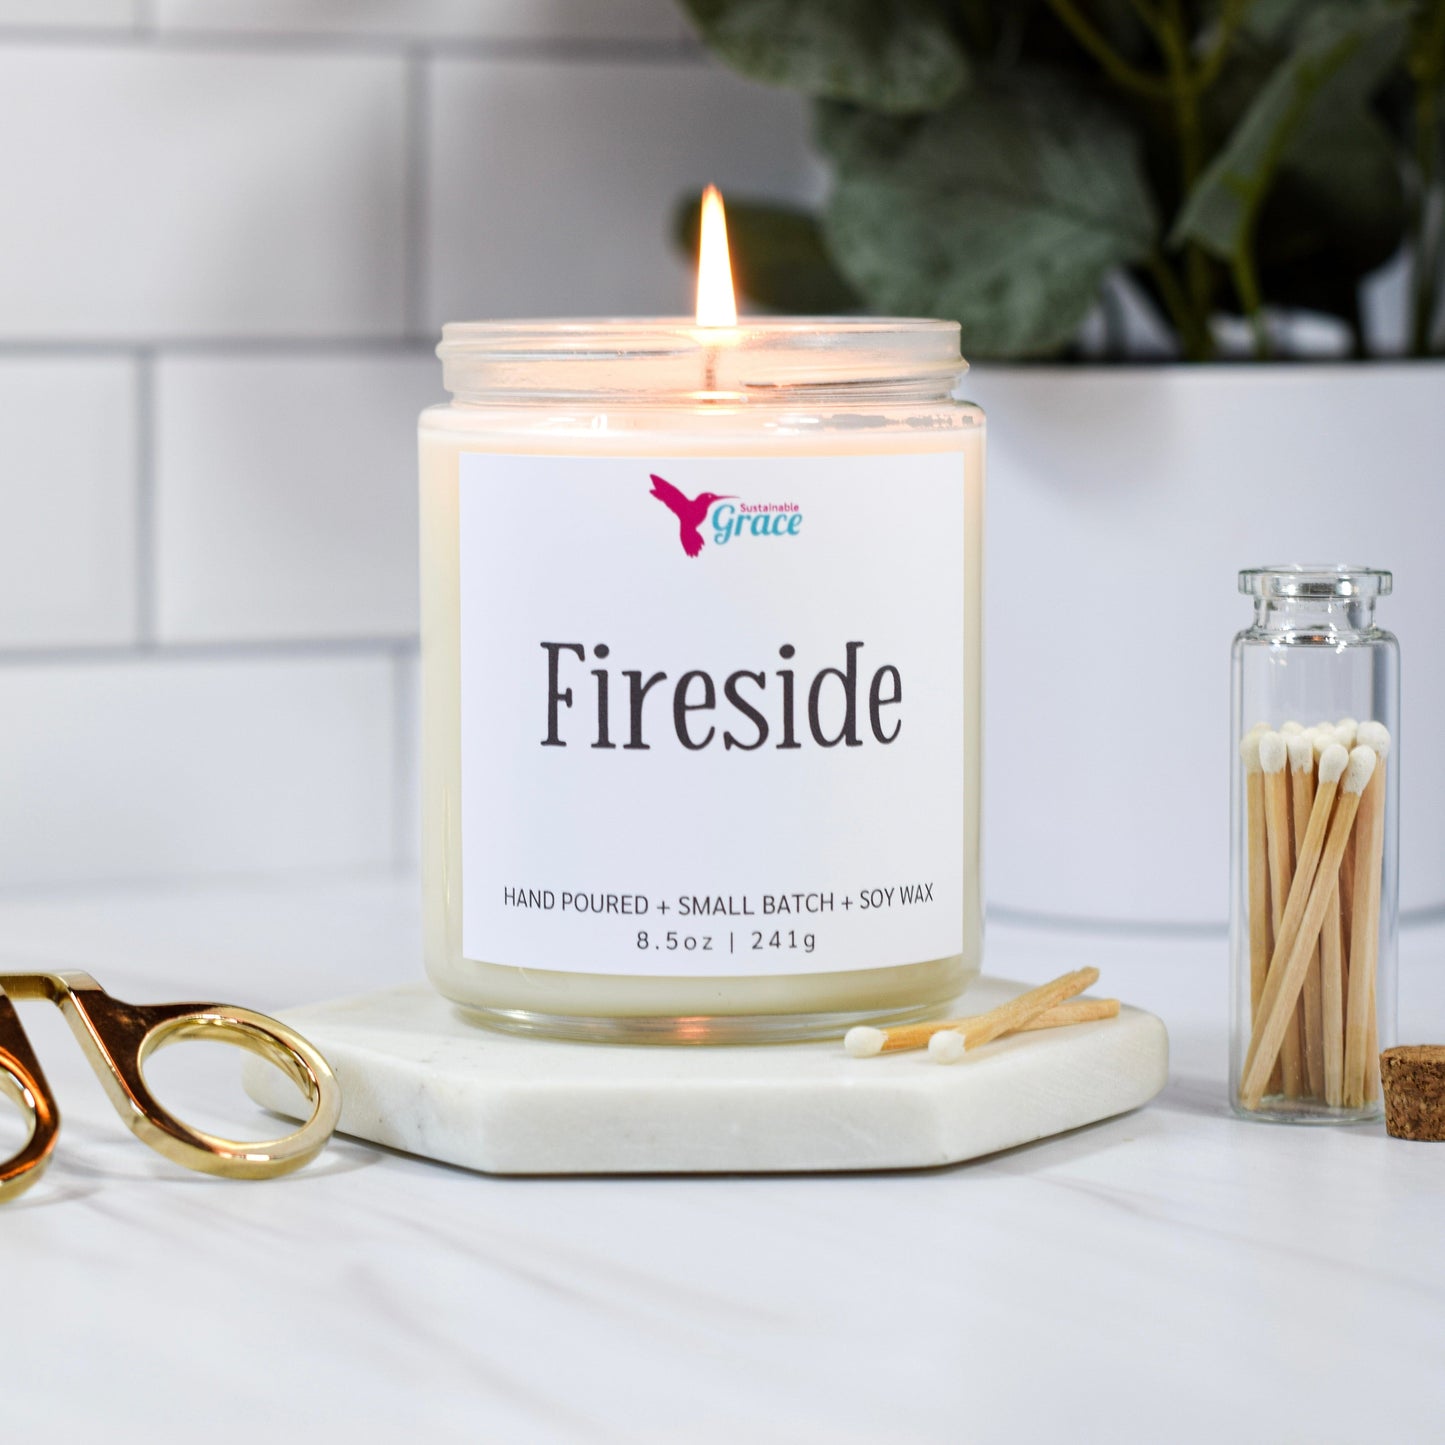 fireside firewood scented soy wax candle